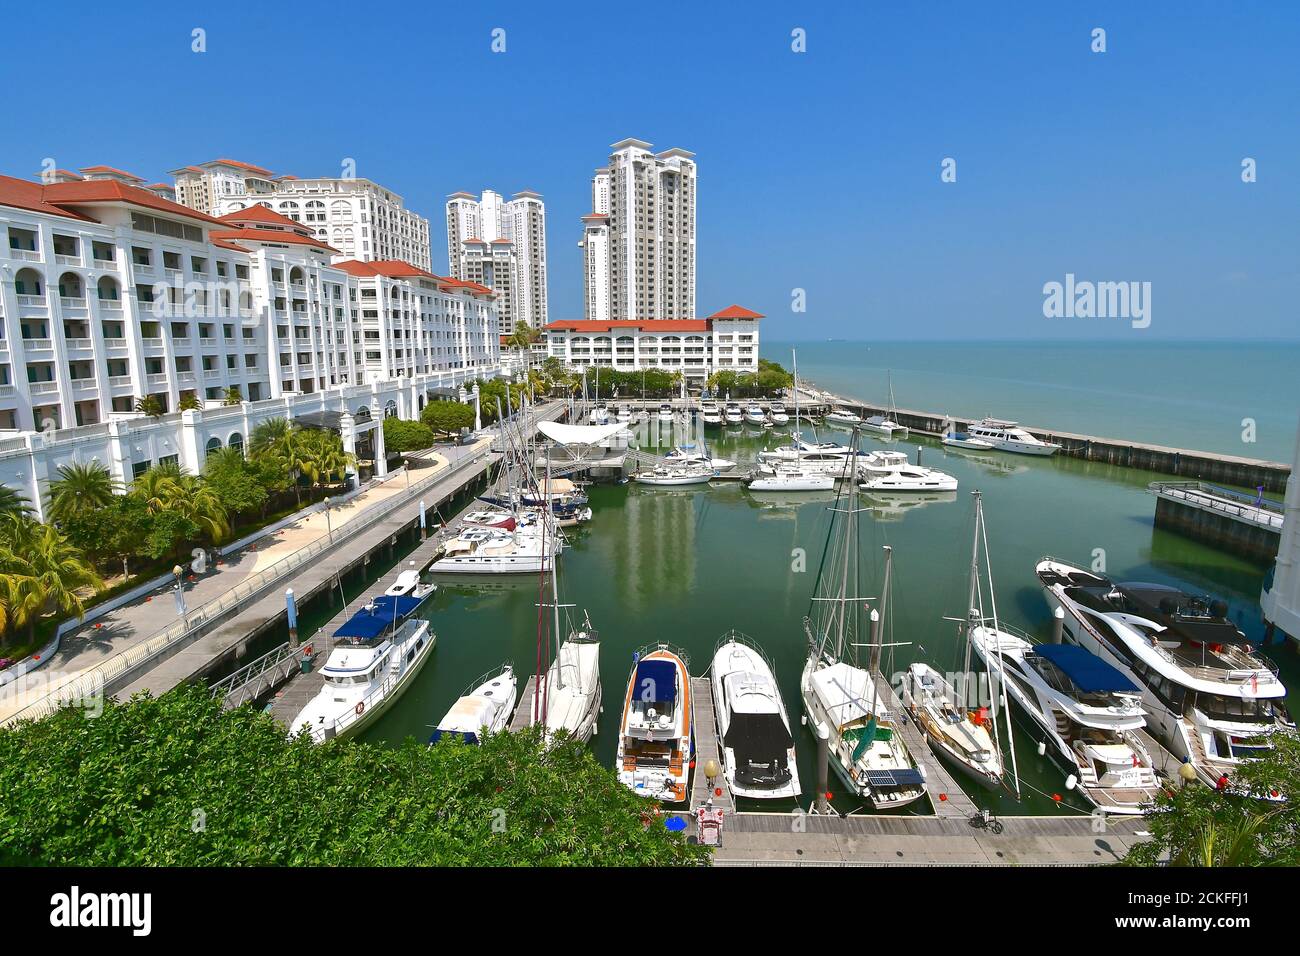 Panoramic view of a luxury yachting marina with yachts and motorboats. Surrounded by high end luxury accomodation and apartments. Stock Photo